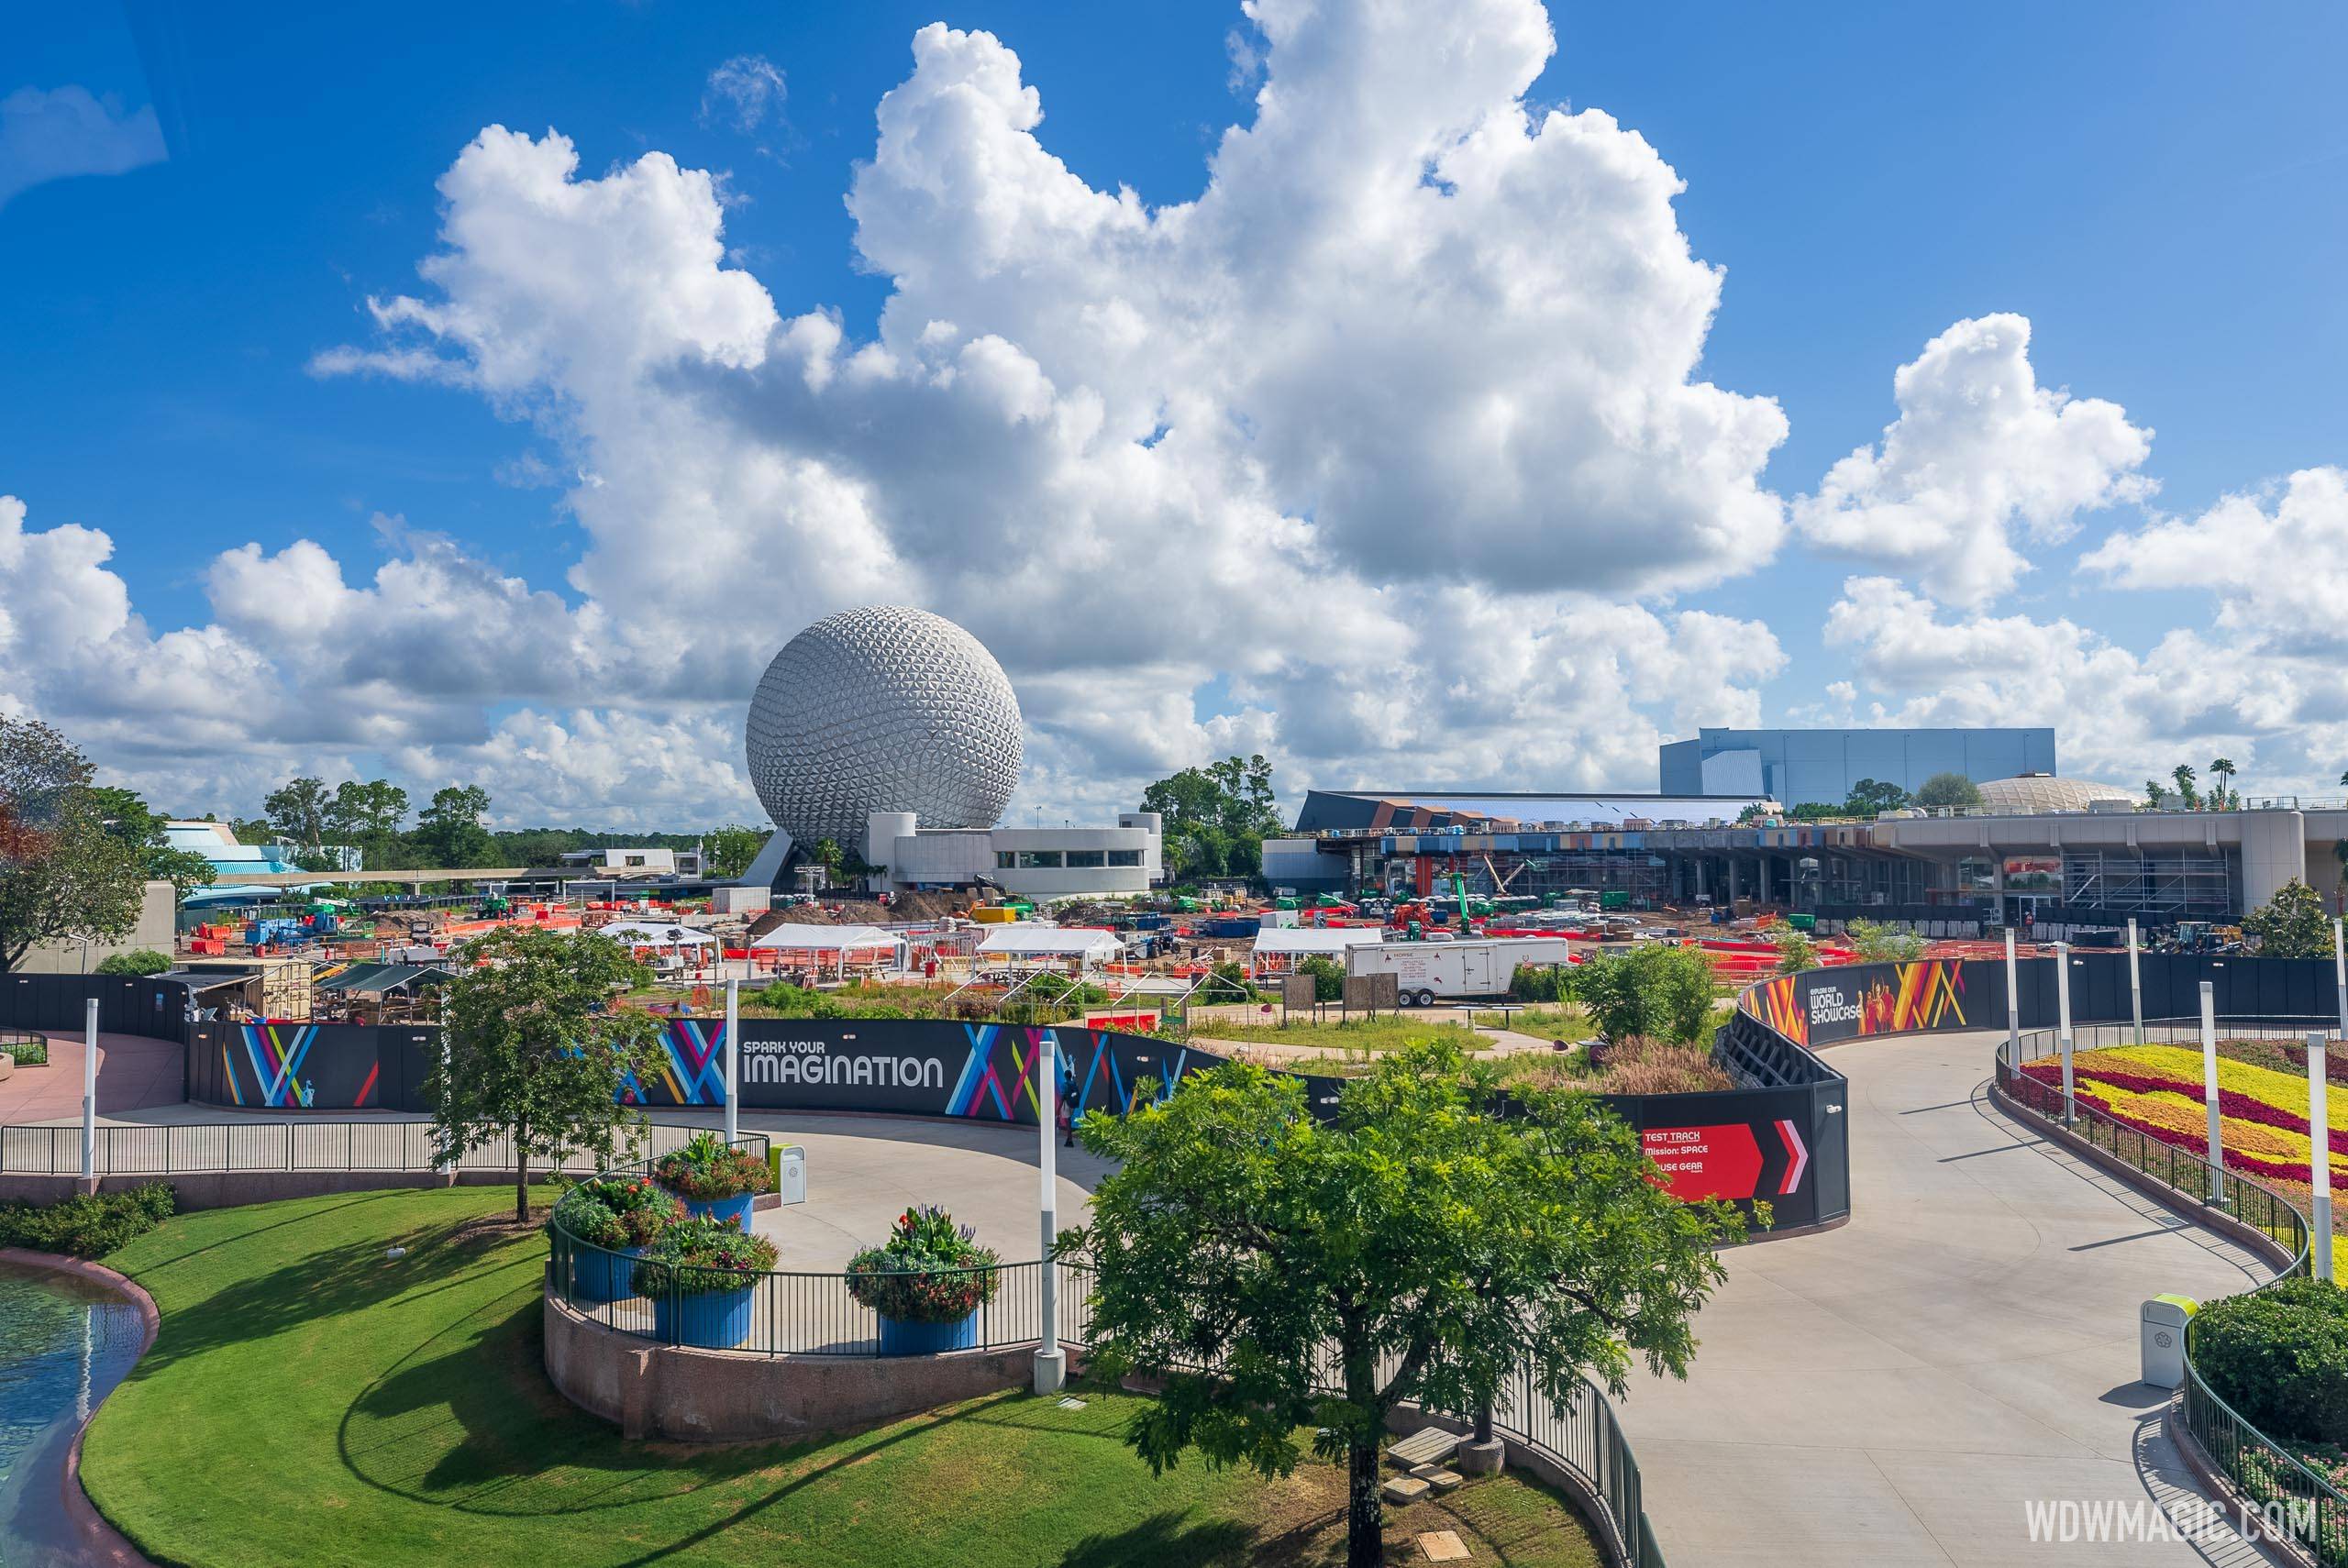 Wide view of the former Future World